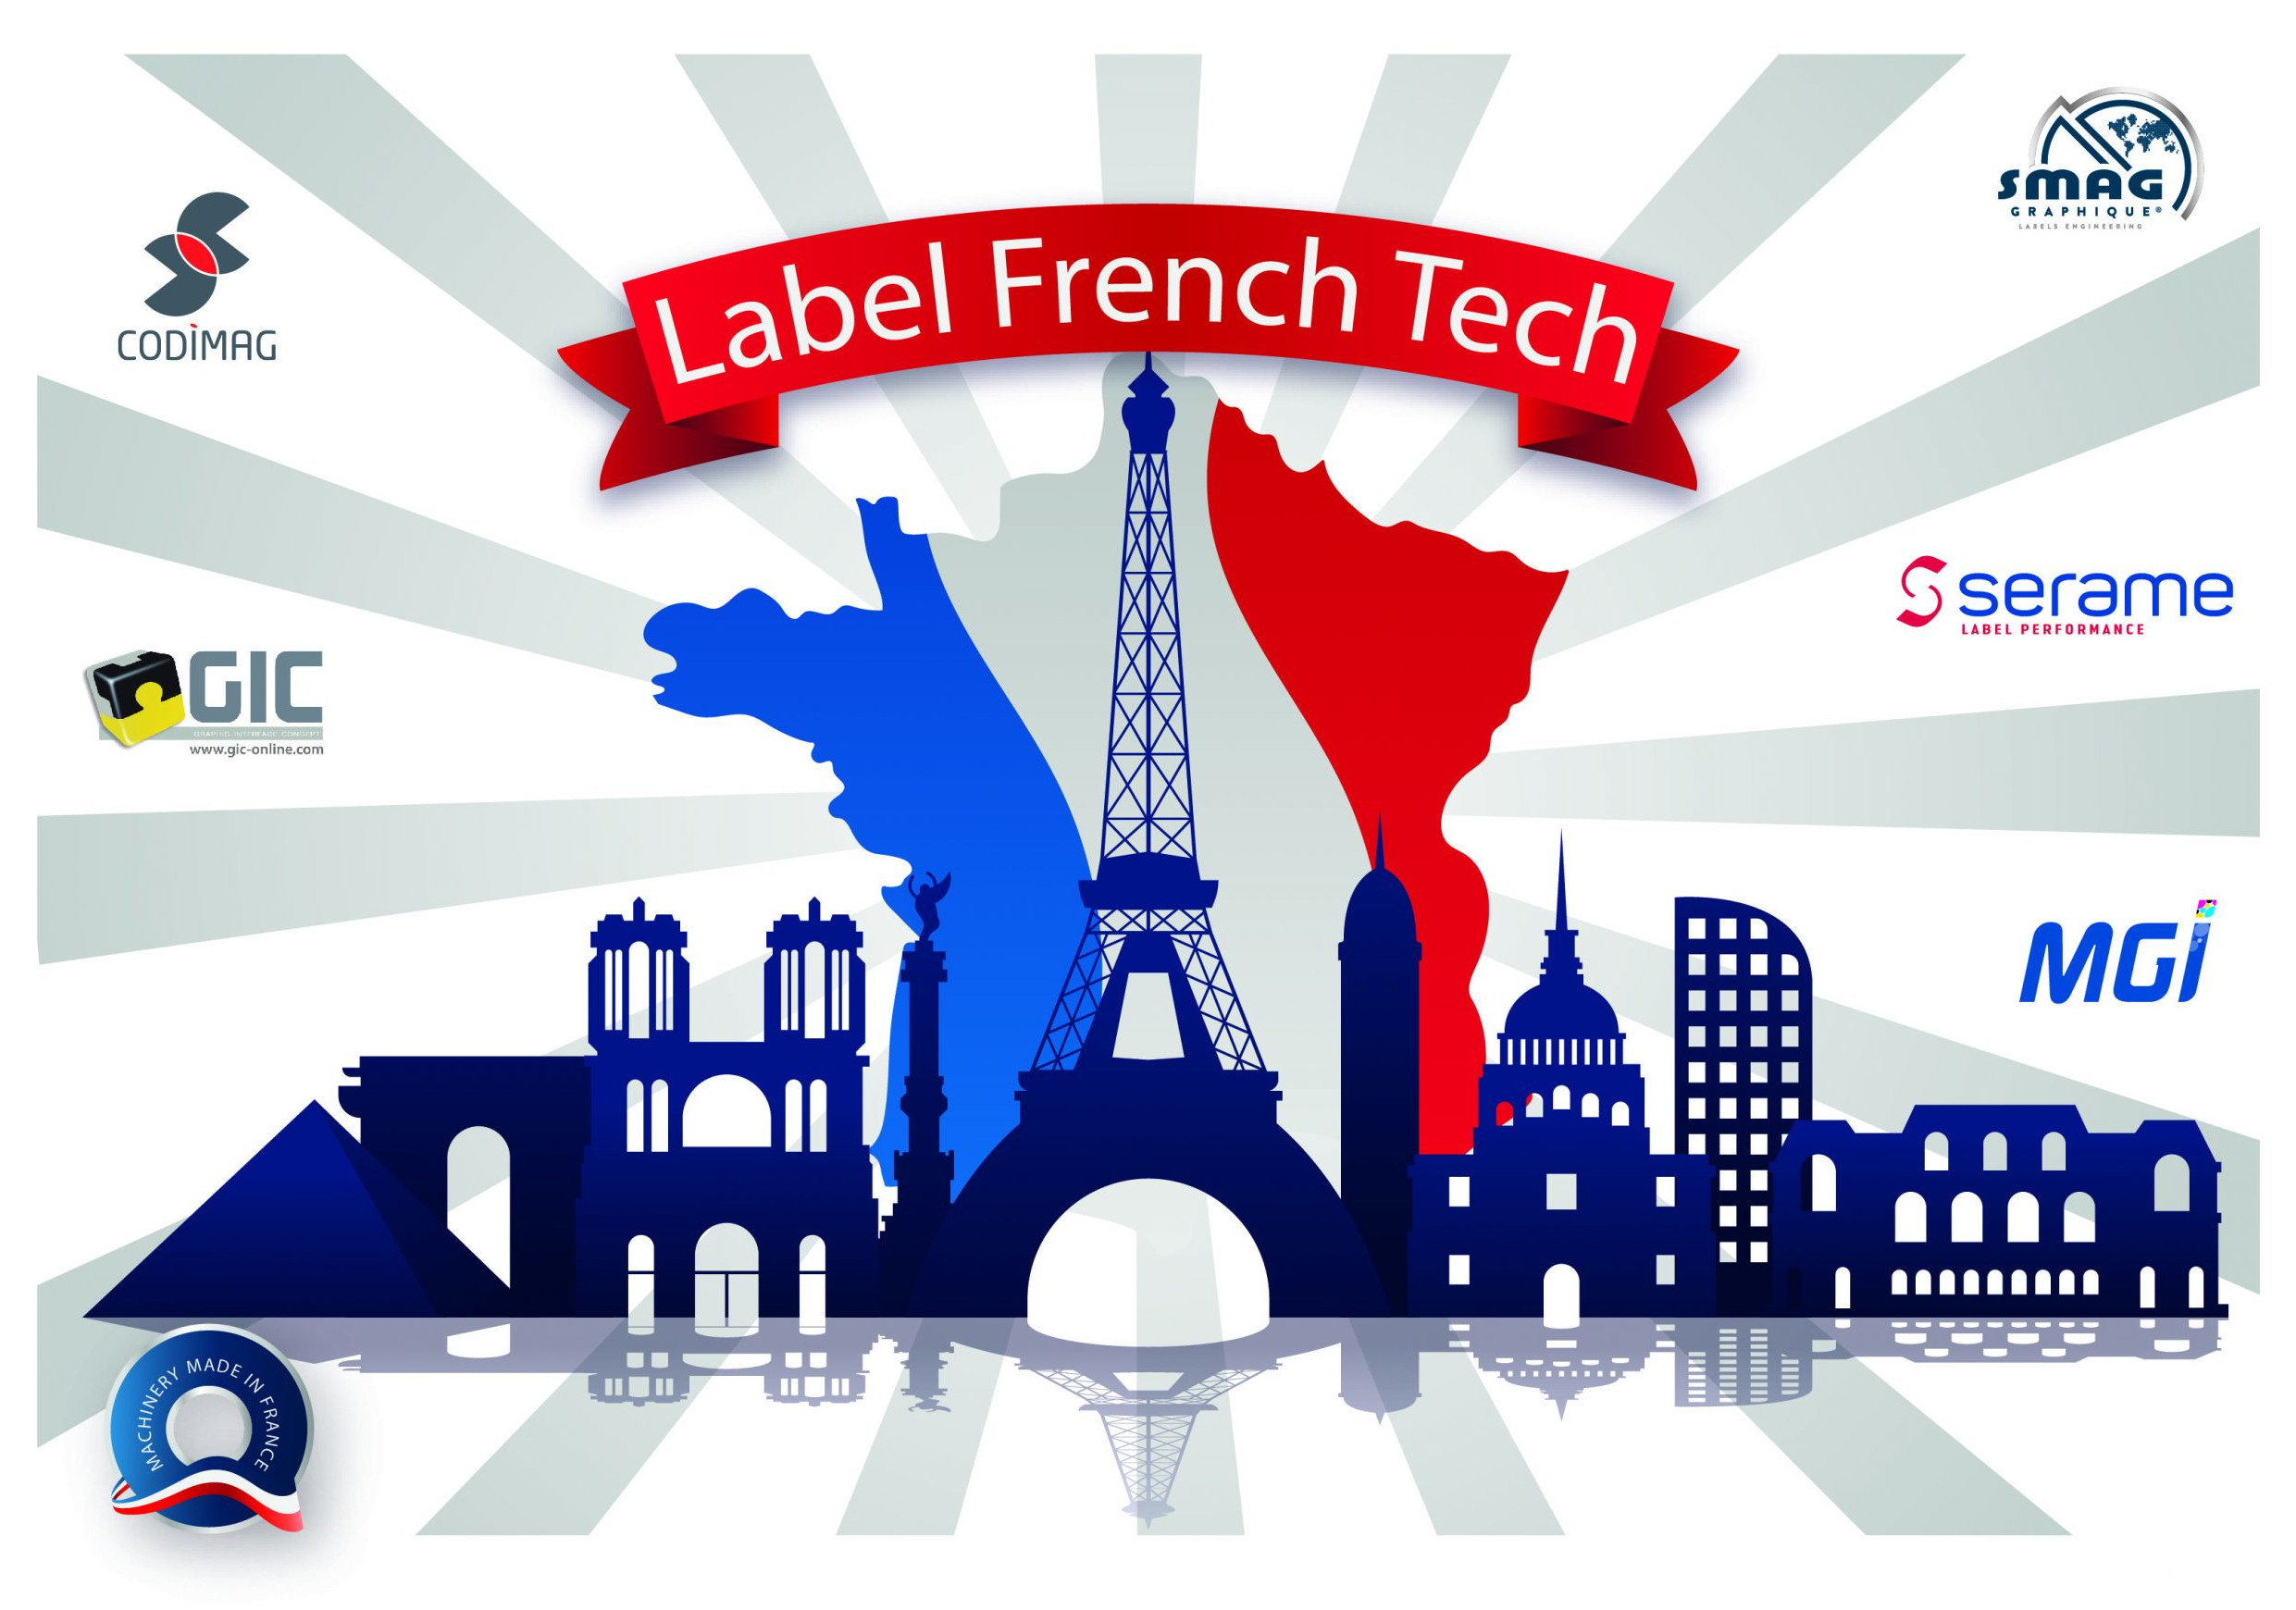 chromos label french tech expo